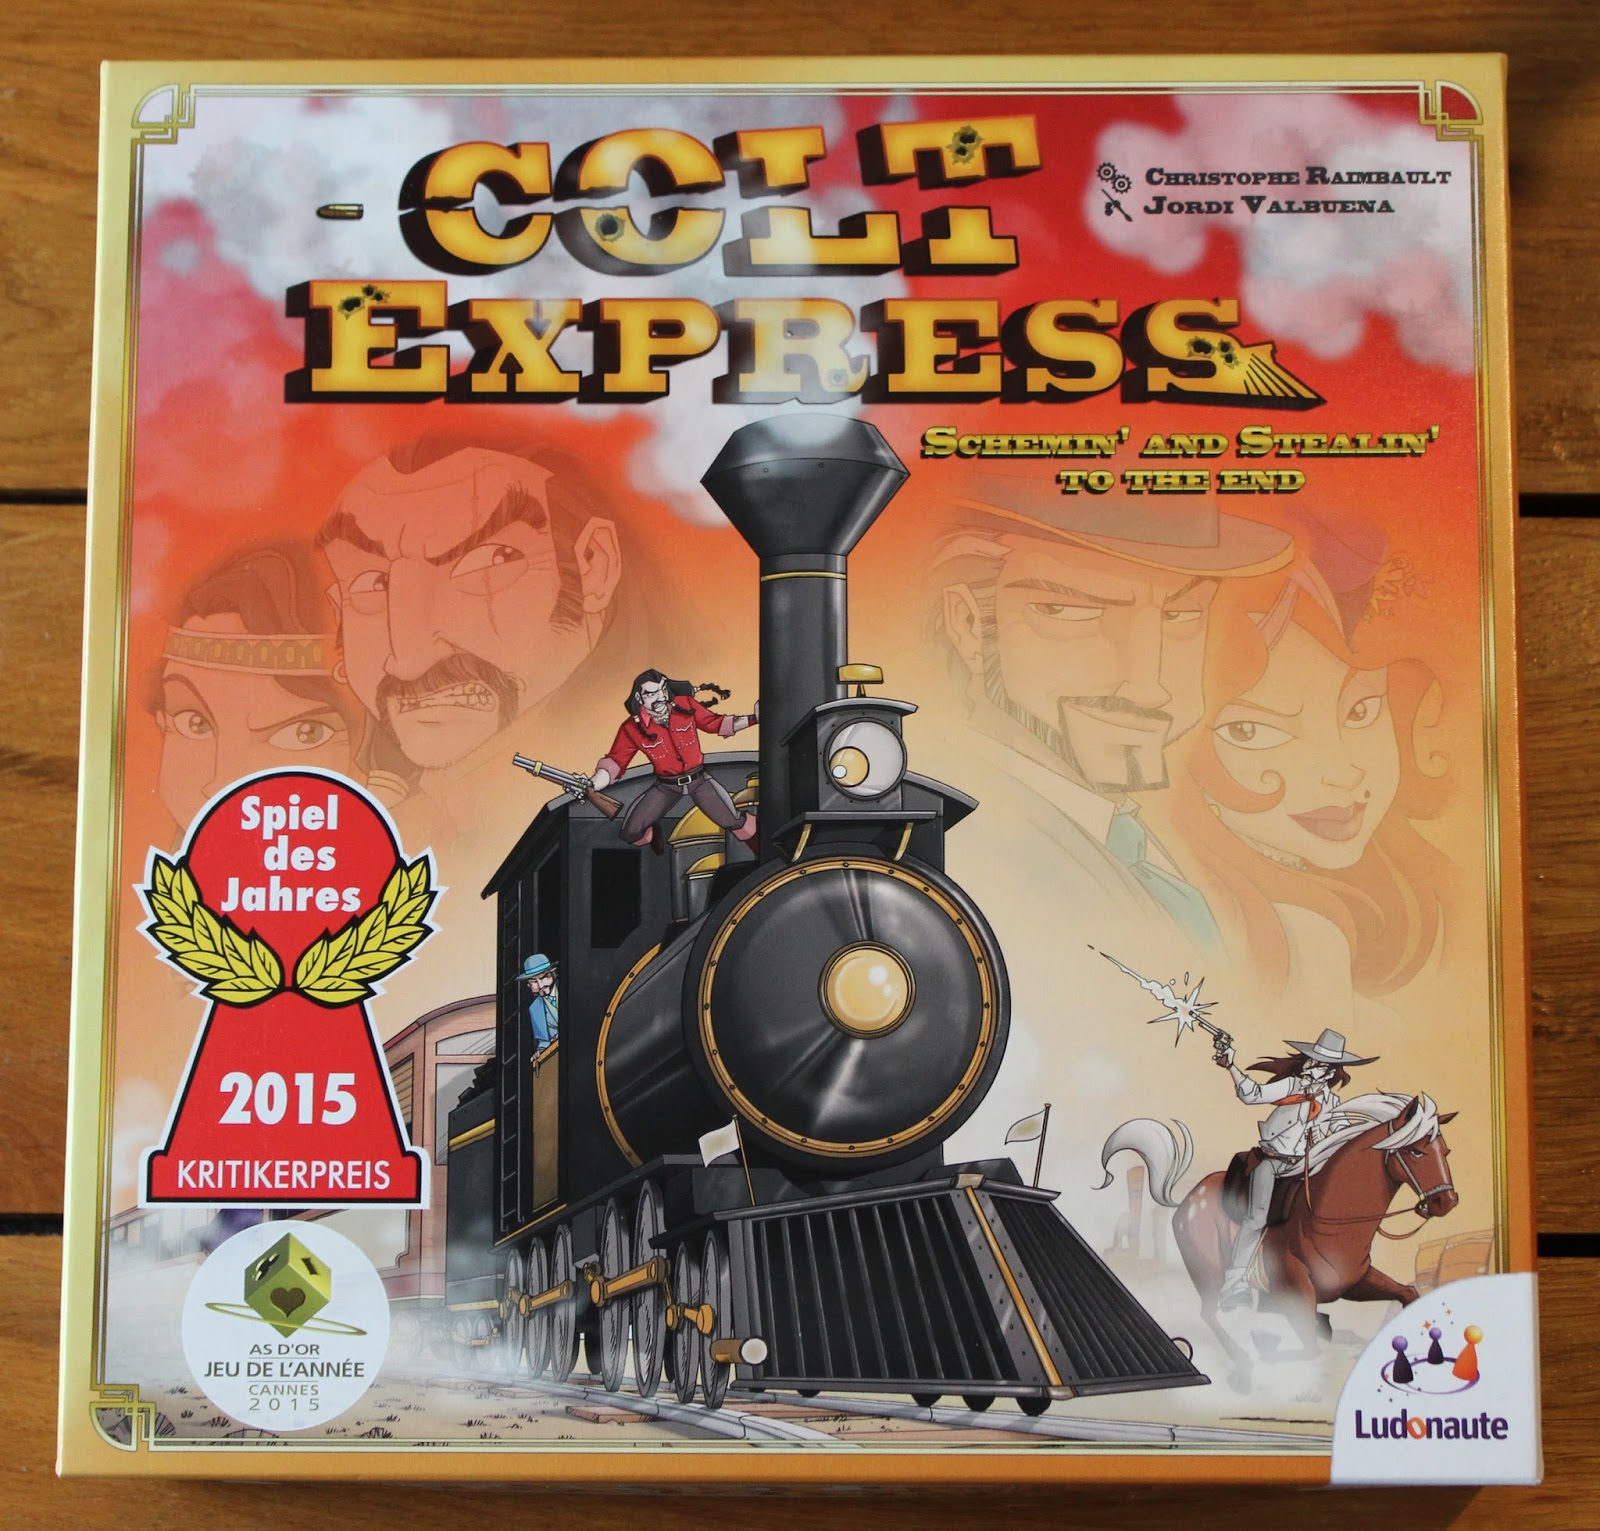 It's time board the chaos train in COLT EXPRESS (Board Game